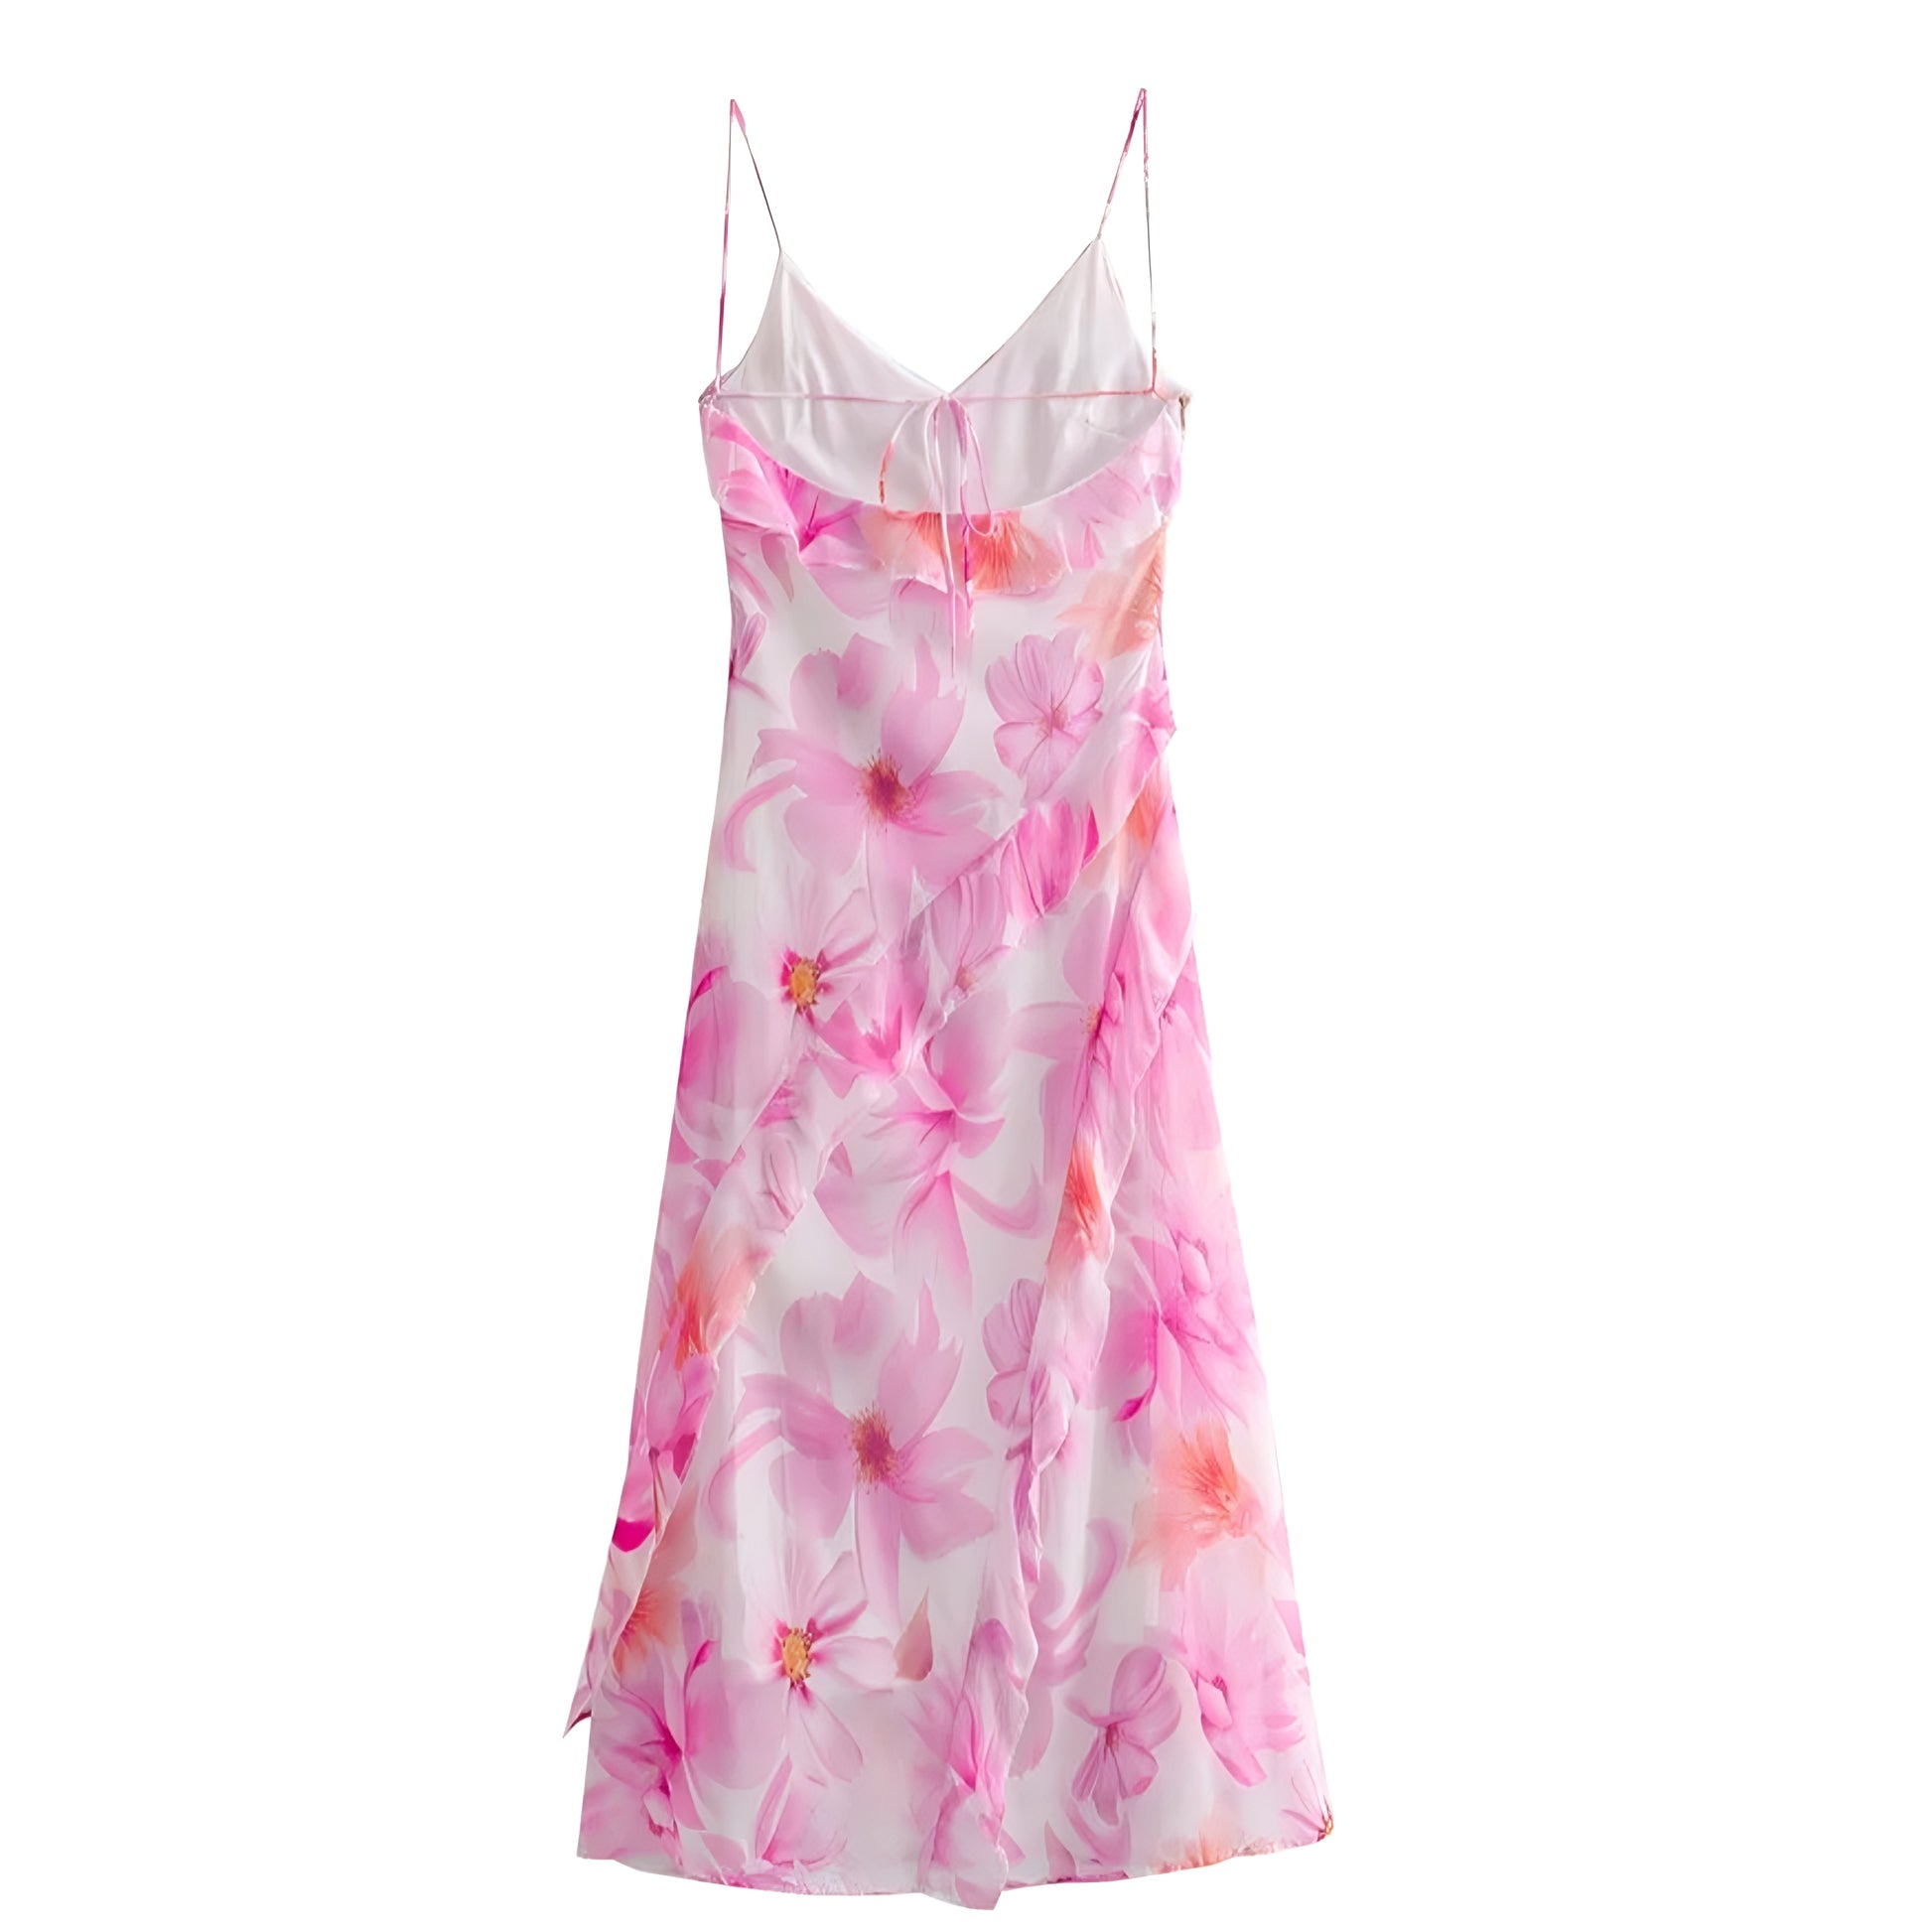 floral-print-light-pink-white-purple-multi-color-flower-patterned-slim-bodycon-silhouette-layered-ruffle-trim-fit-and-flare-sleeveless-v-neck-spaghetti-strap-backless-open-back-tiered-linen-flowy-boho-bohemian-midi-long-maxi-dress-evening-gown-women-ladies-teens-tweens-chic-trendy-spring-2024-summer-elegant-casual-semi-formal-classy-feminine-preppy-style-prom-homecoming-hoco-graduation-cocktail-party-wedding-guest-vacation-sundress-altard-state-revolve-reformation-loveshackfancy-rilato-dupe